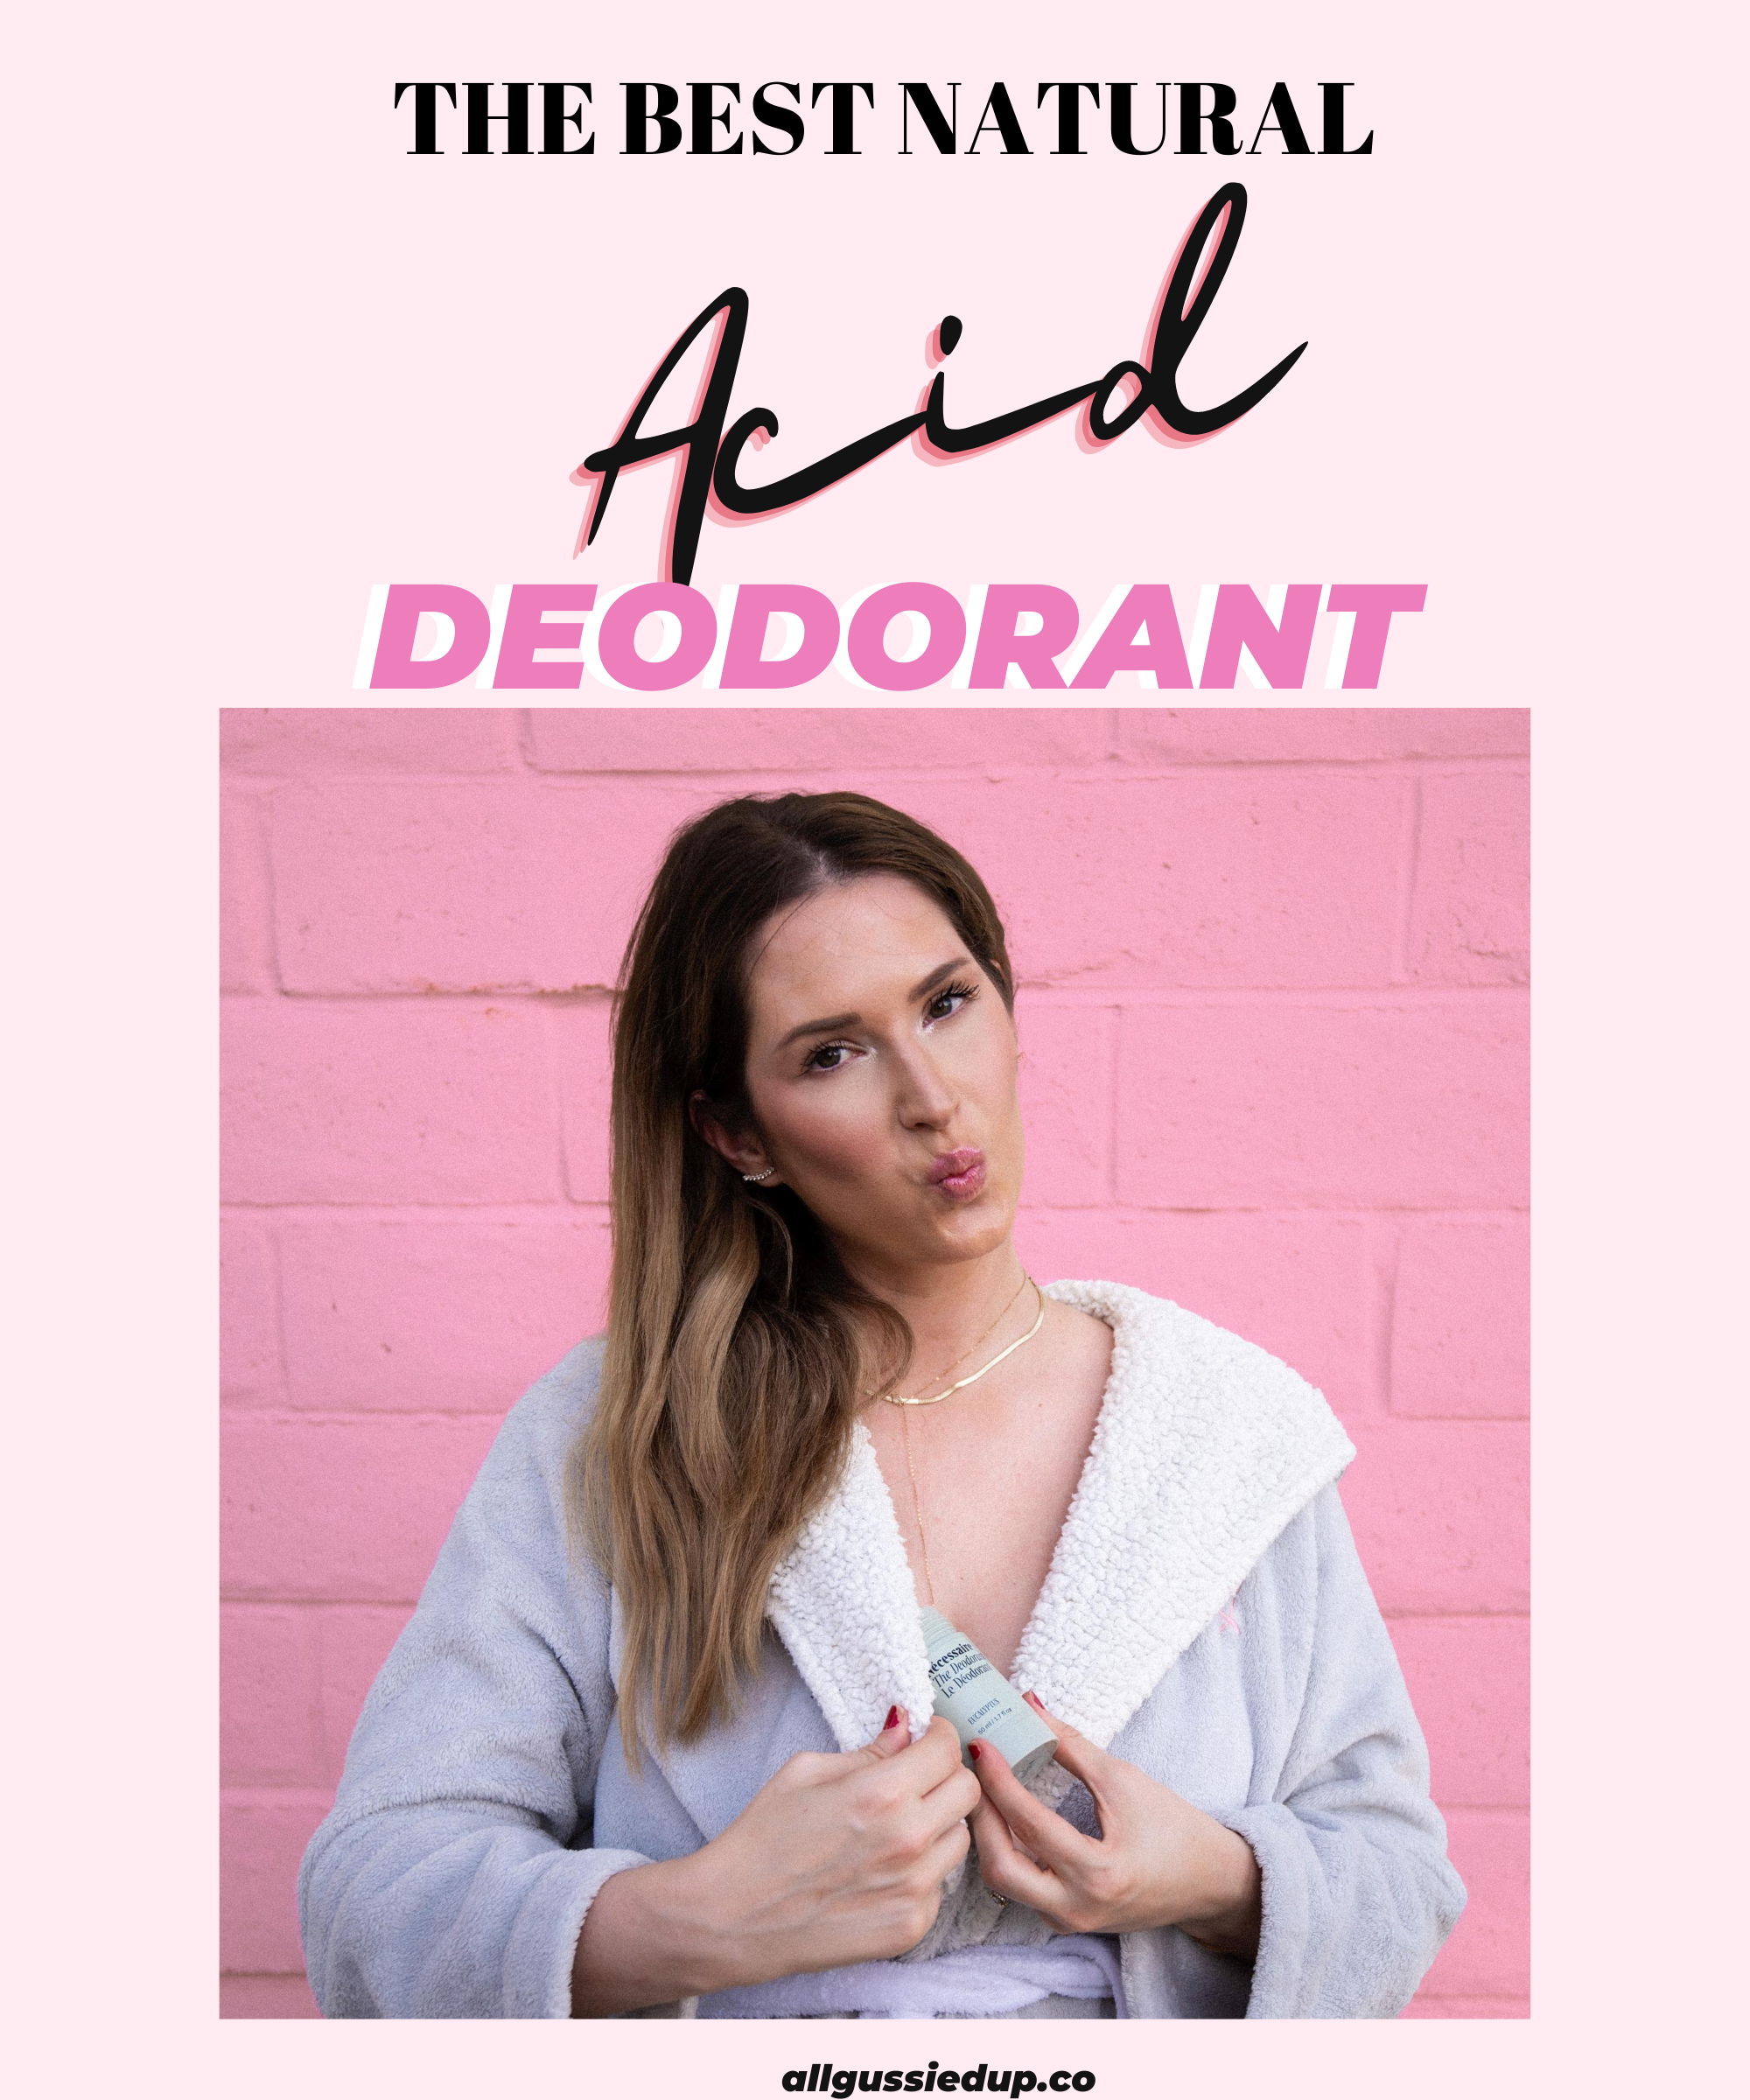 Why Acid Deodorant is the best